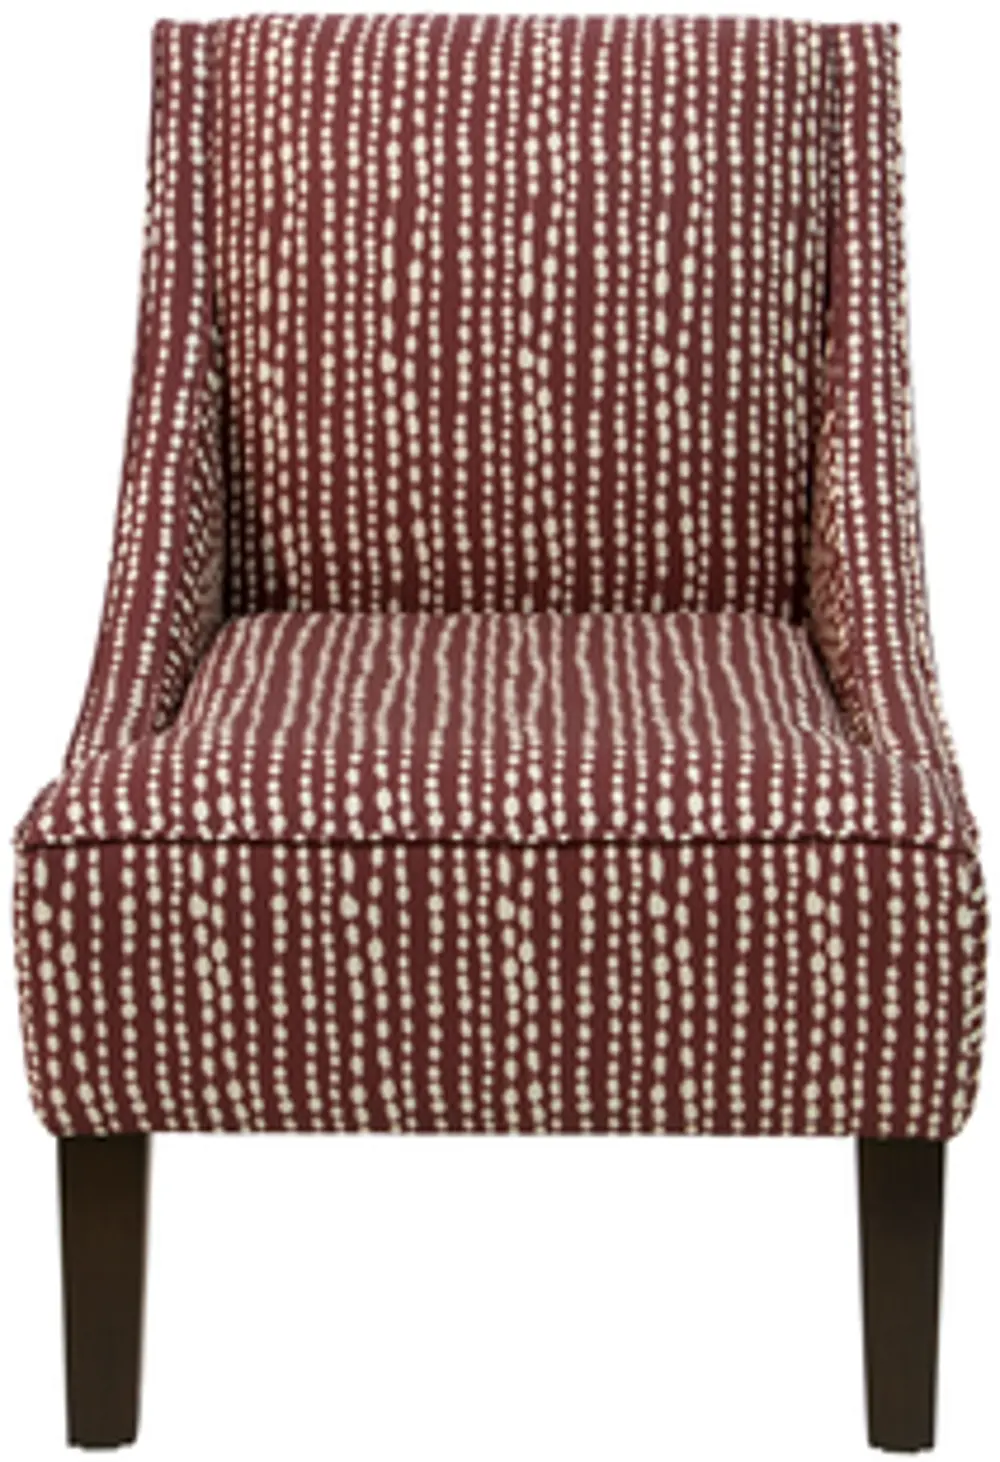 72-1LNDTHLDRD Line Dot Holiday Red Swoop Arm Chair-1